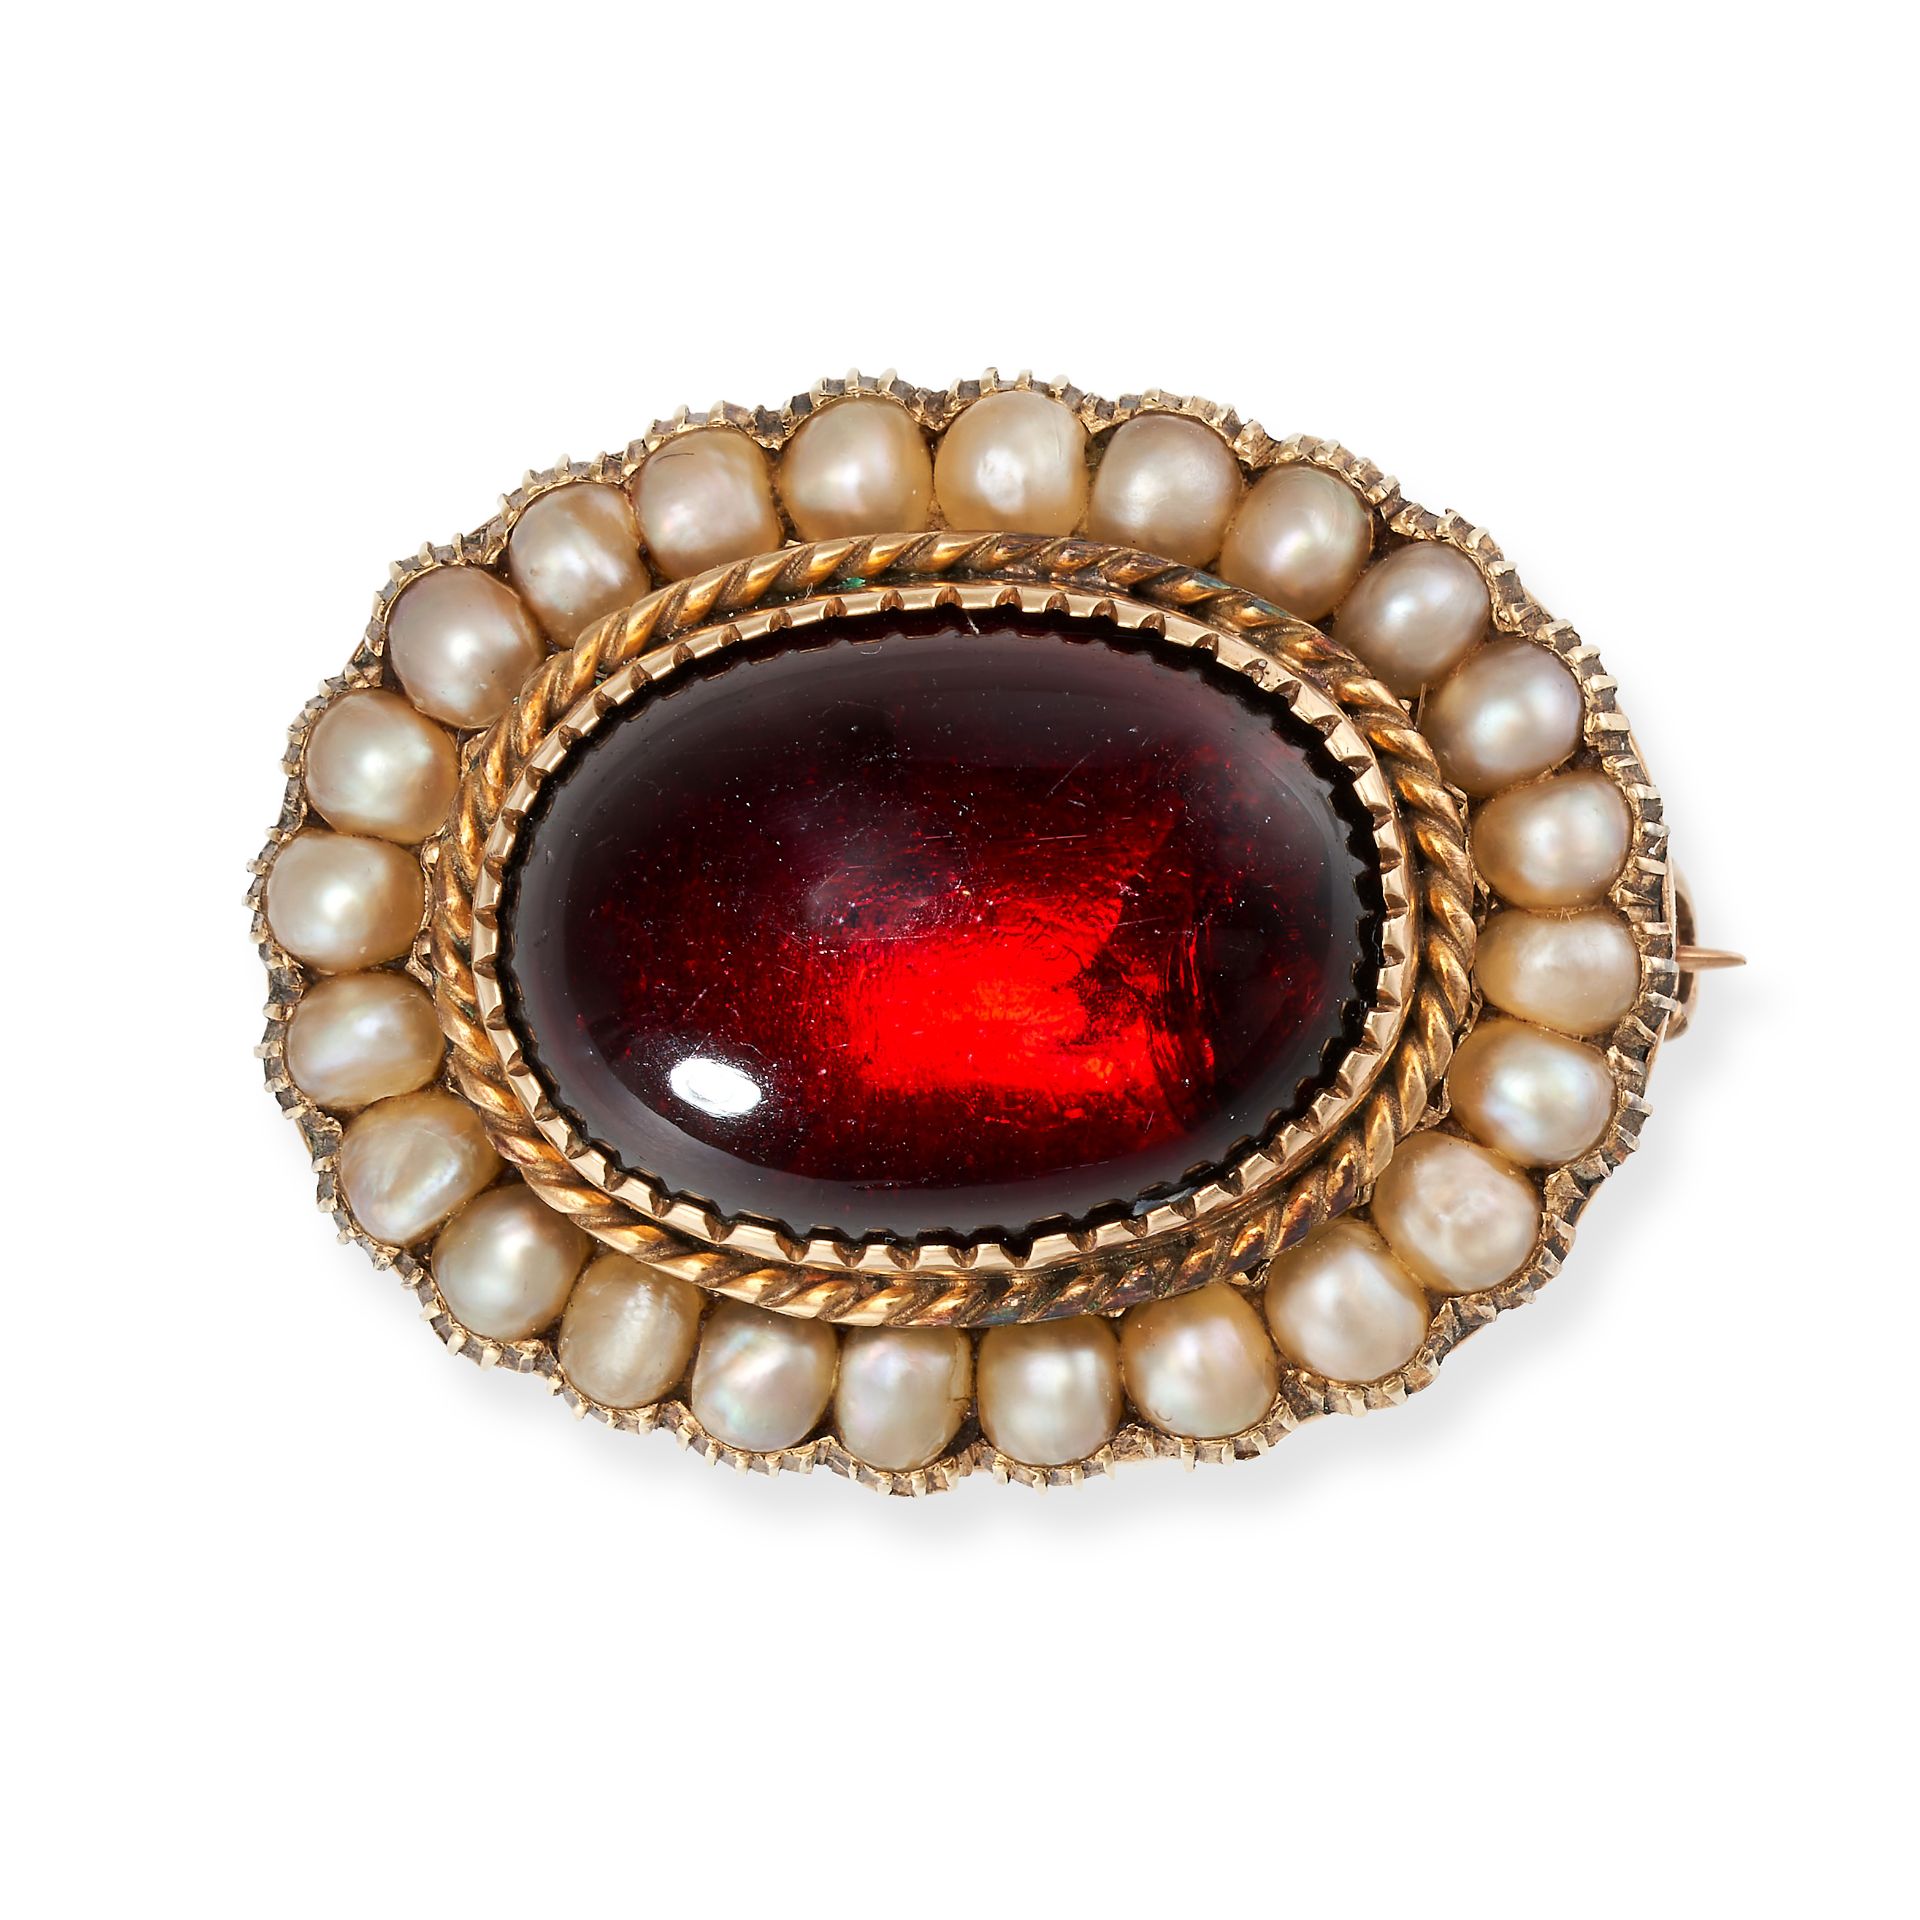 NO RESERVE - AN ANTIQUE GARNET AND PEARL CLUSTER BROOCH set with an oval cabochon garnet in a clu...